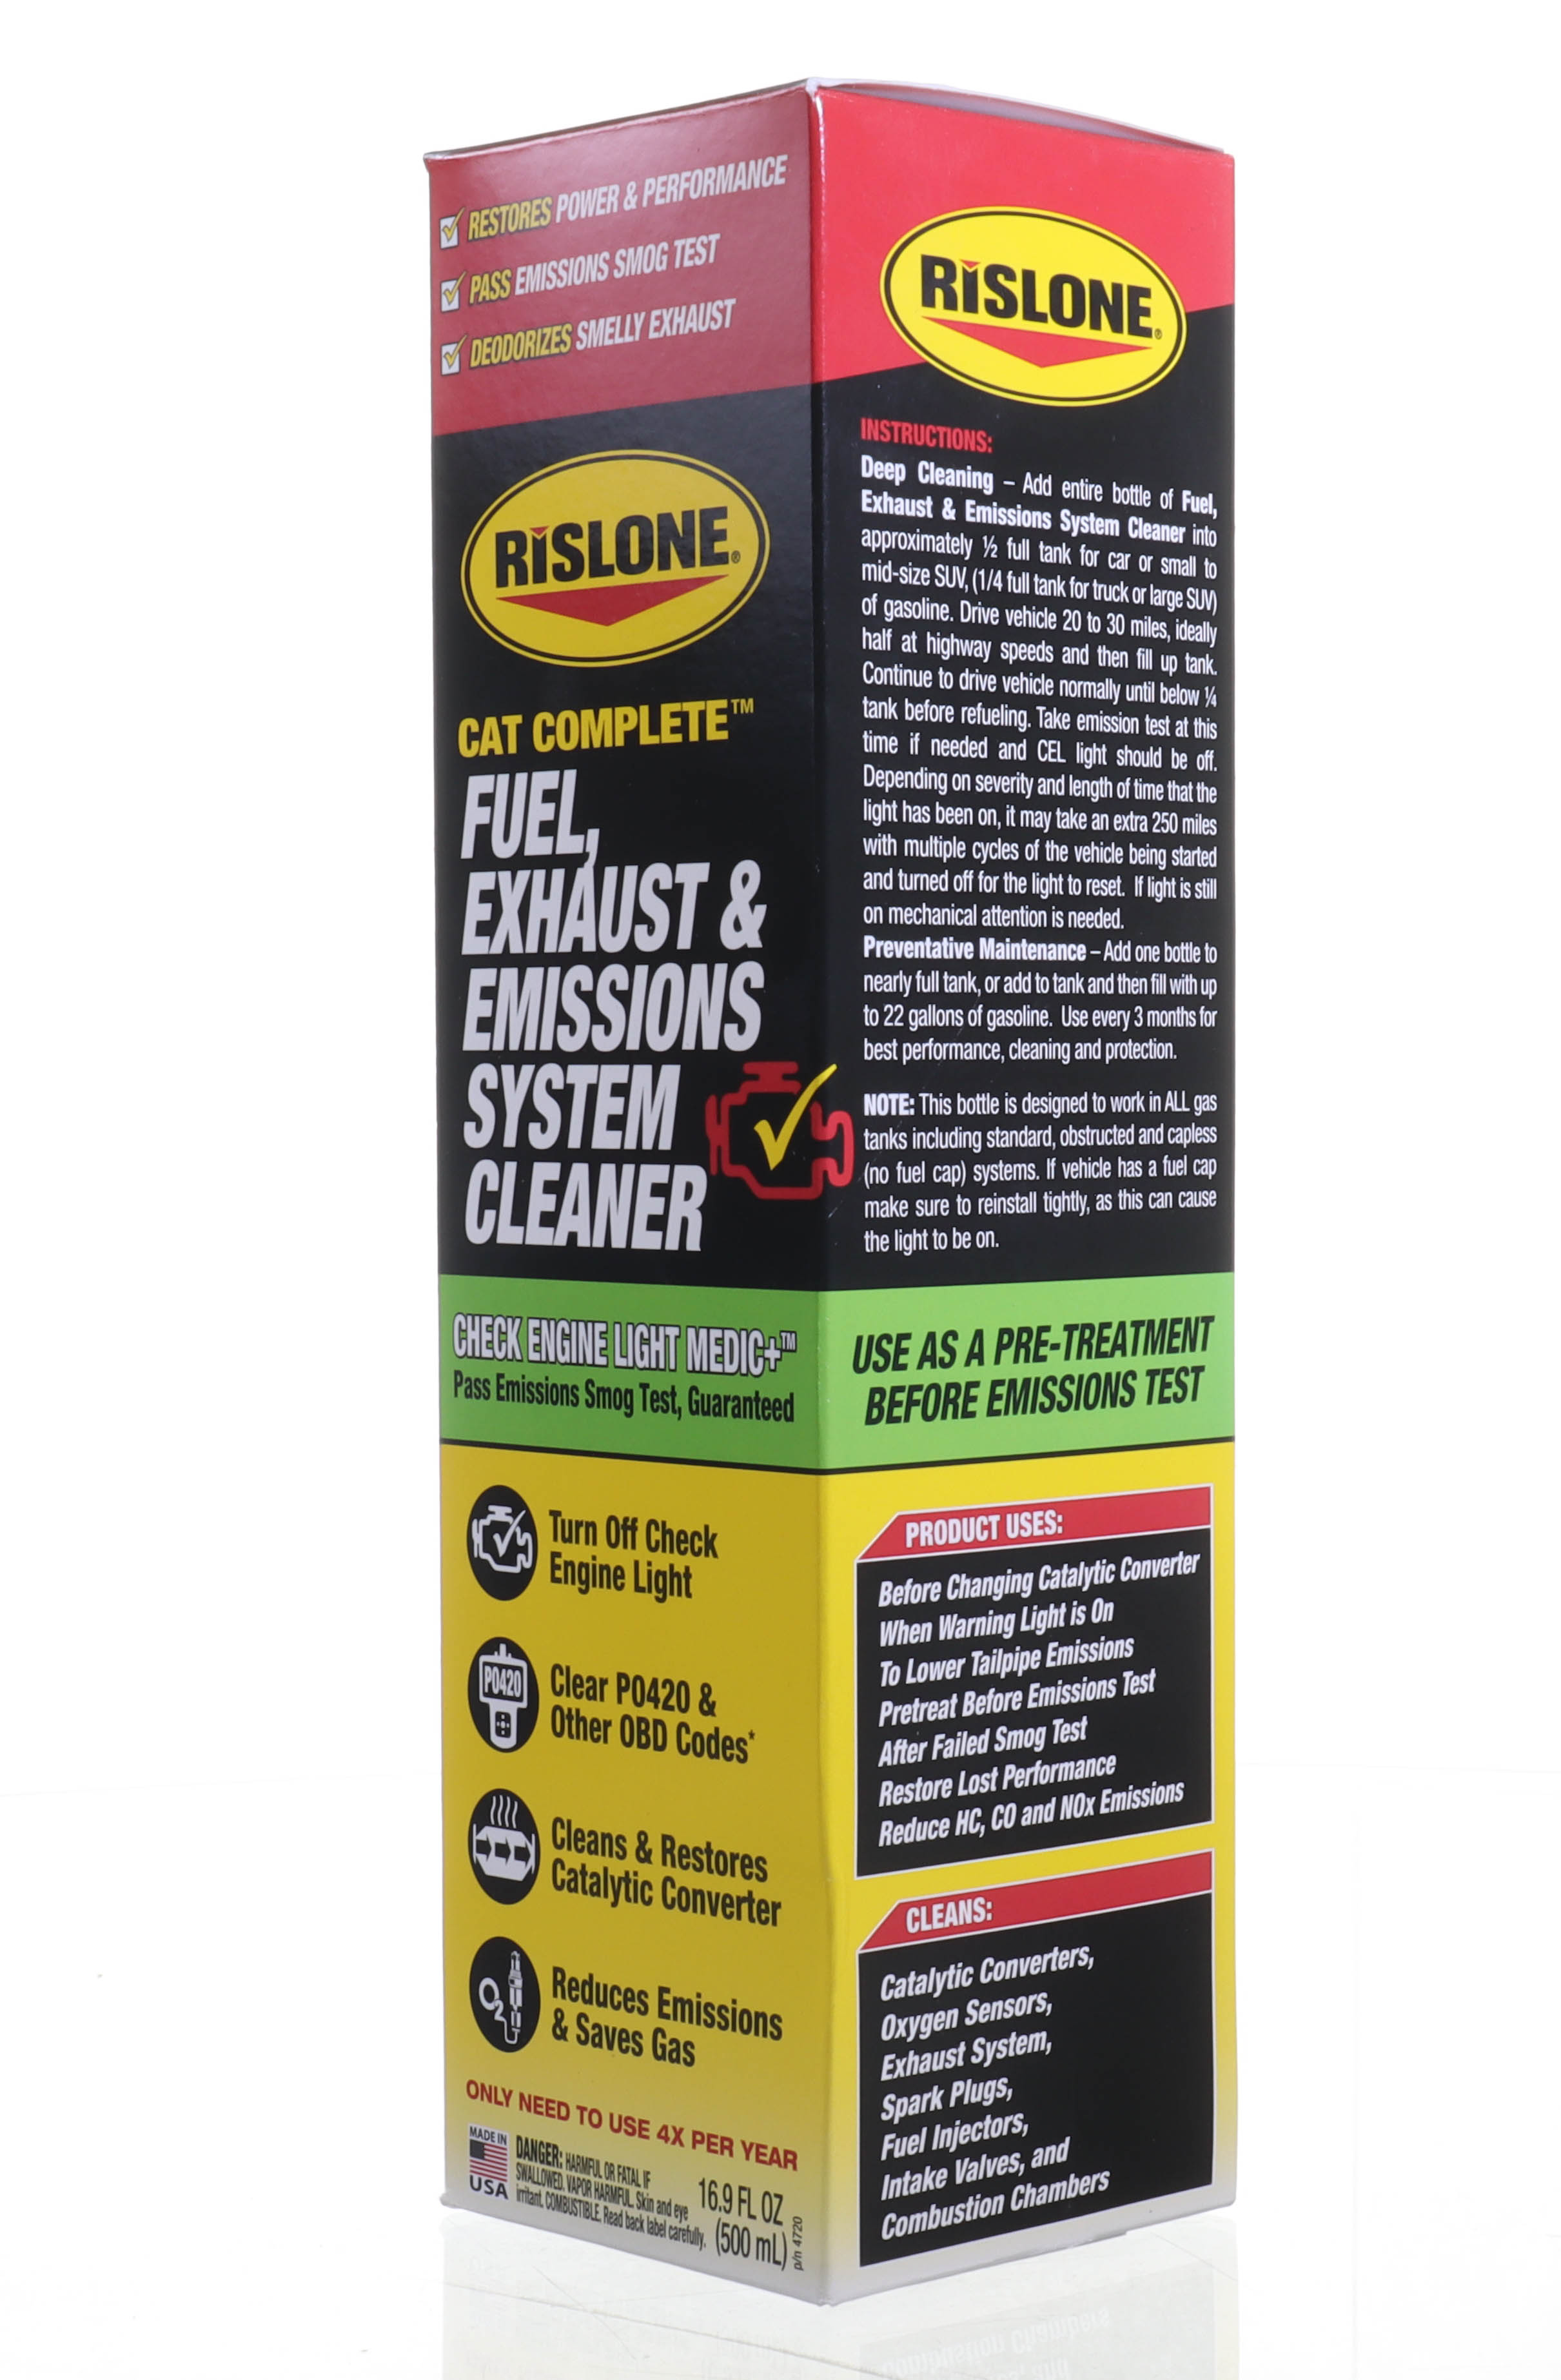 Rislone Cat Complete Fuel, Exhaust and Emissions System Cleaner